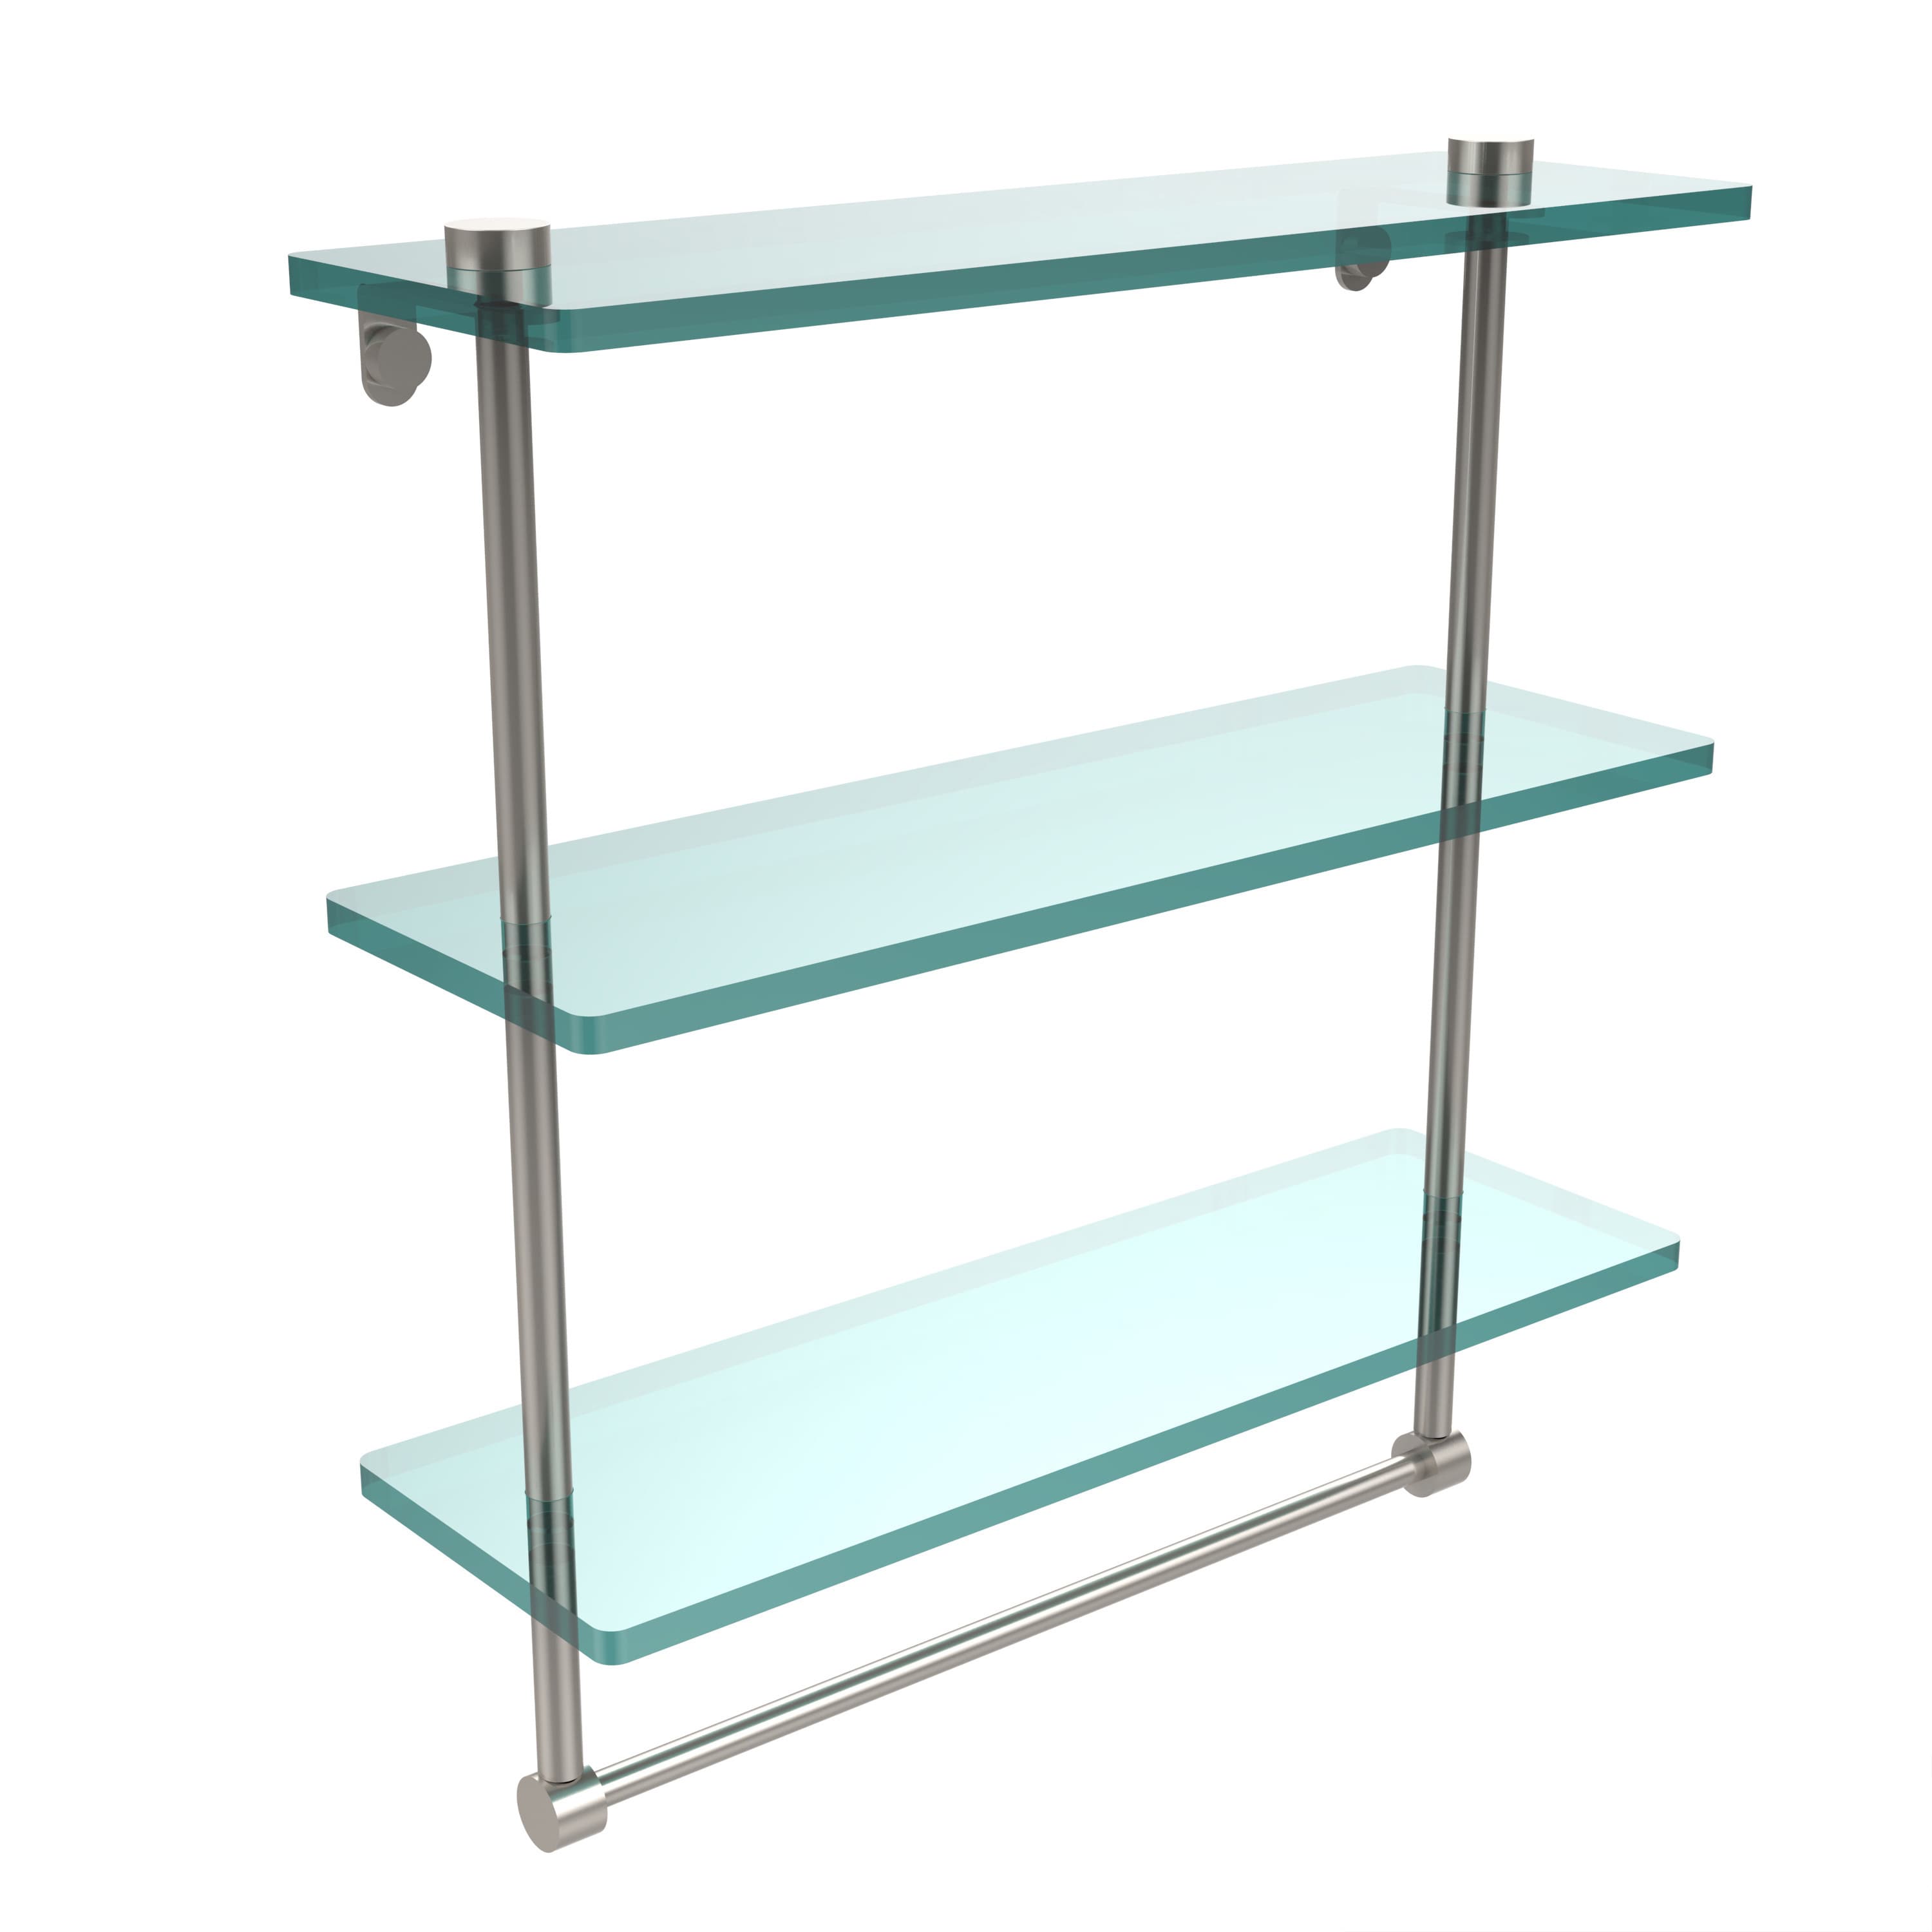 16-in Triple Tiered Glass Shelf with Integrated Towel Bar in Polished Nickel - image 2 of 5